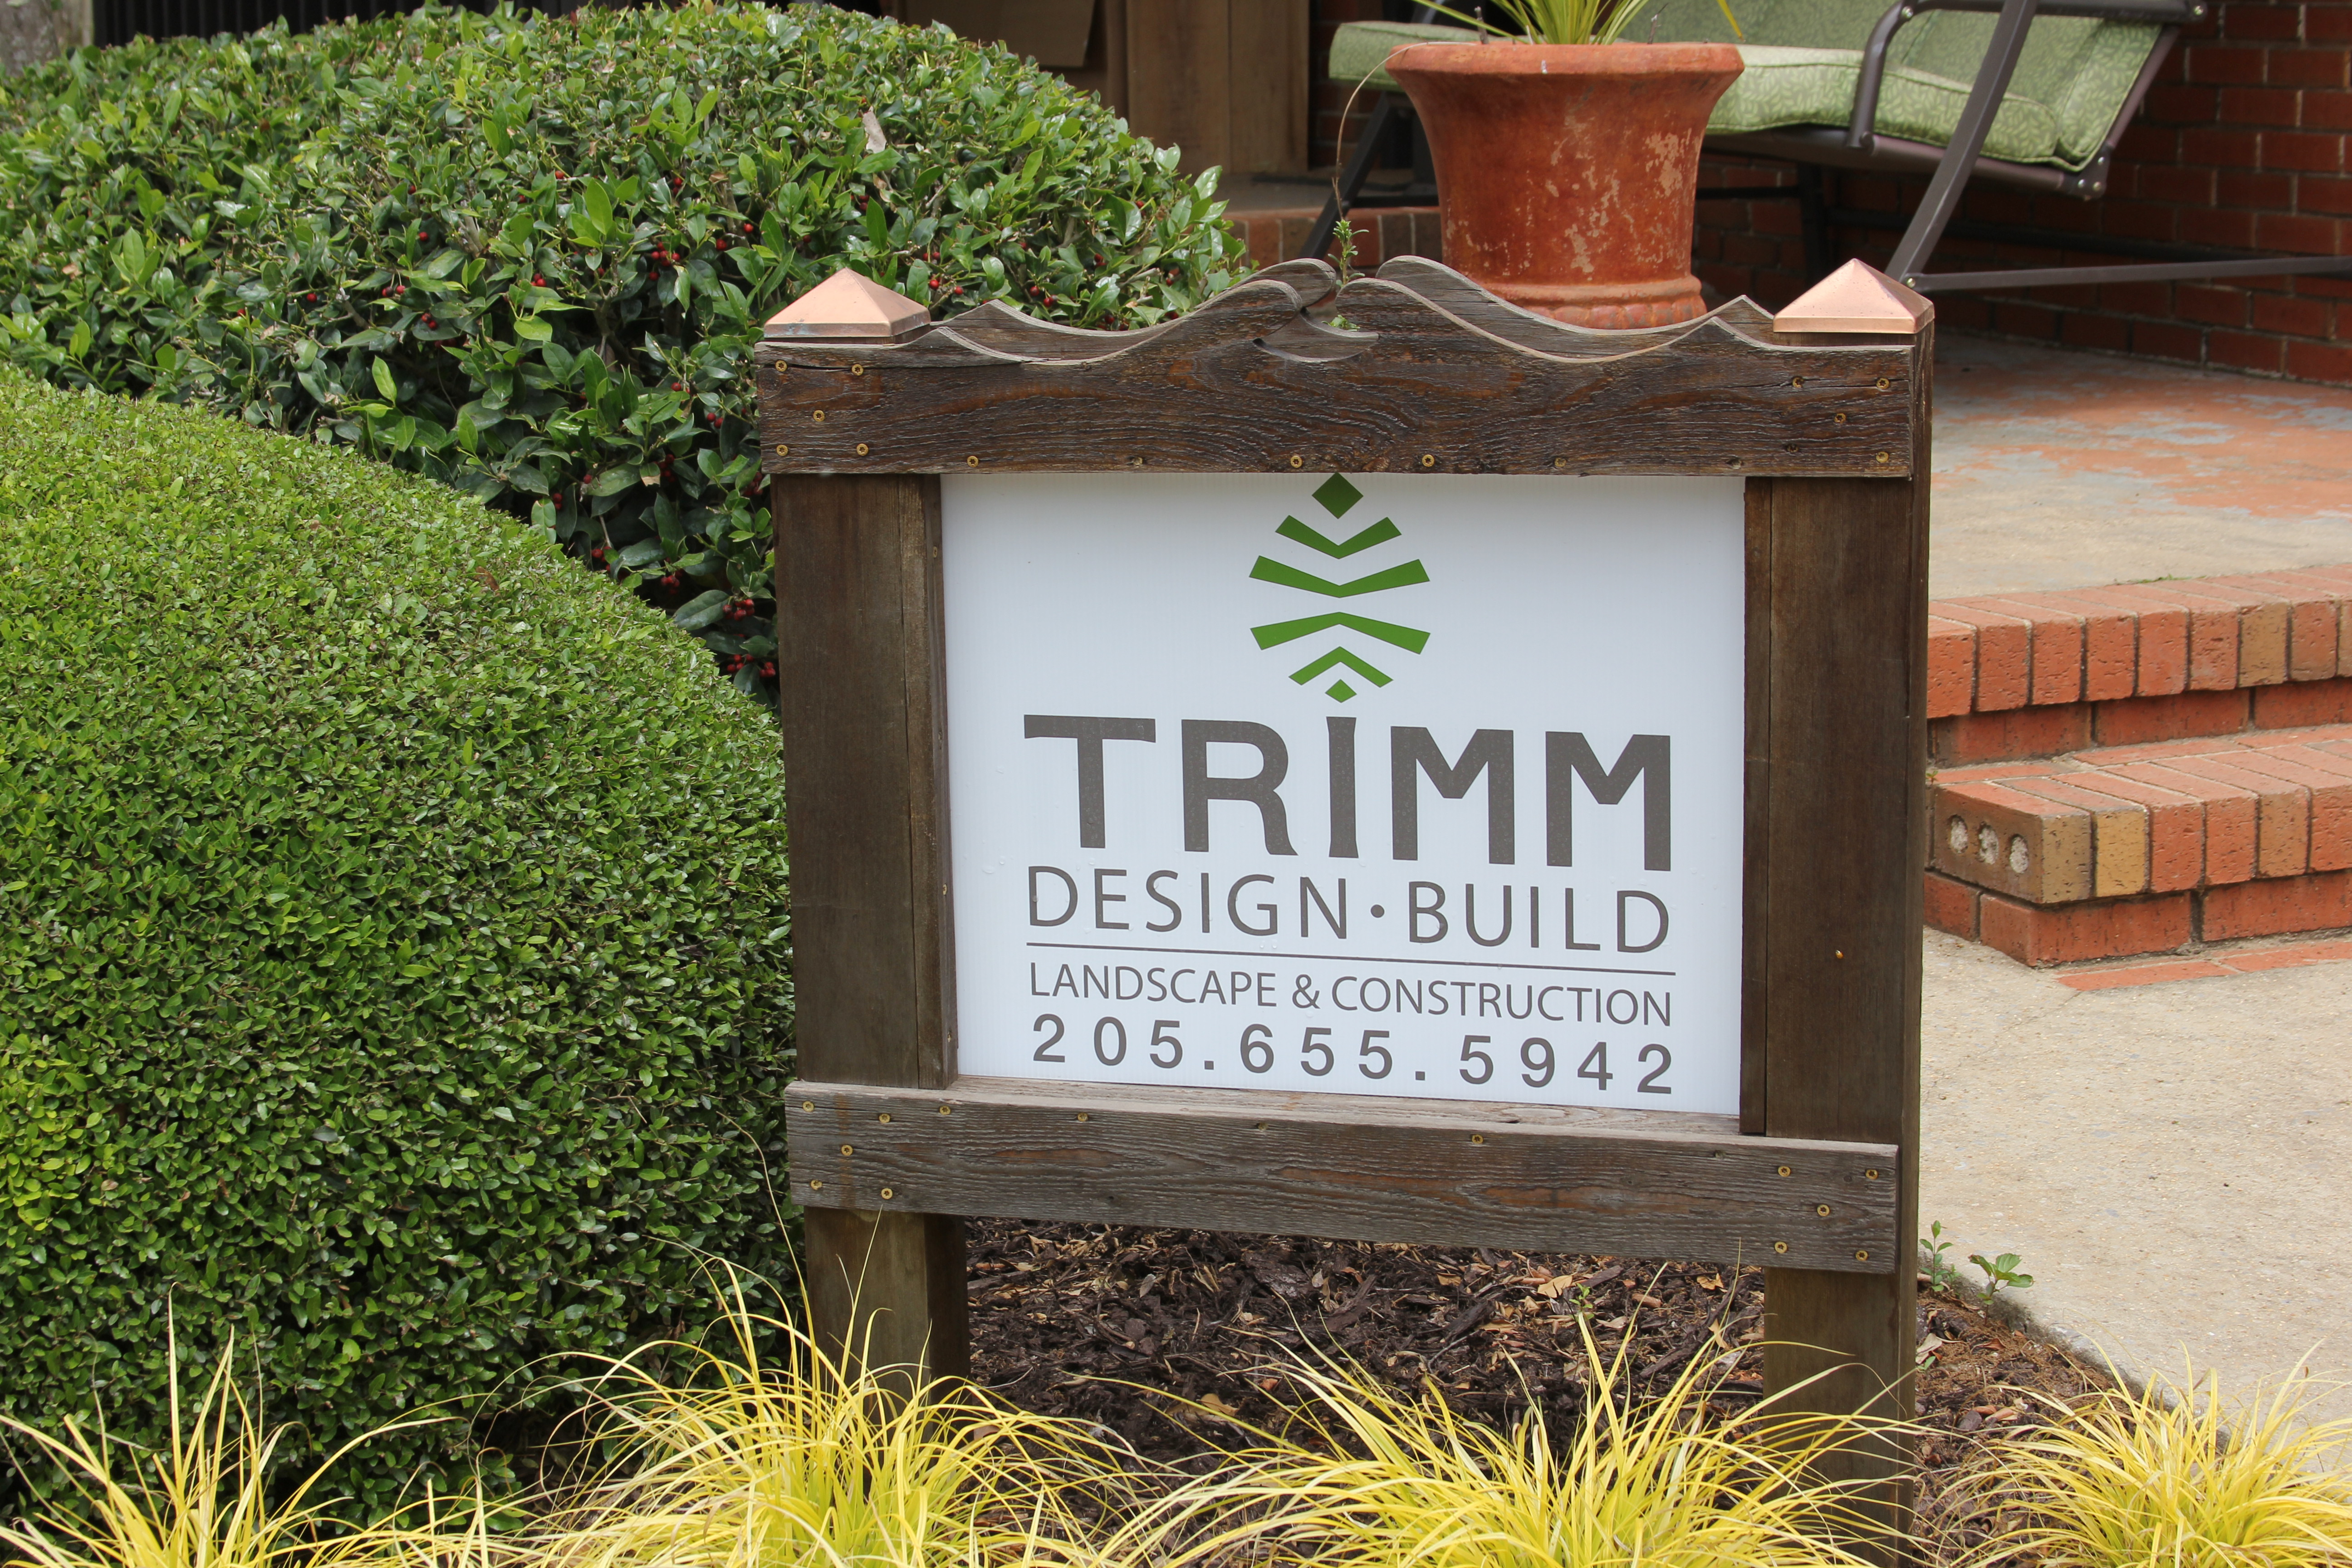 Trimm Landscapes offering exceptional customer service since 1979